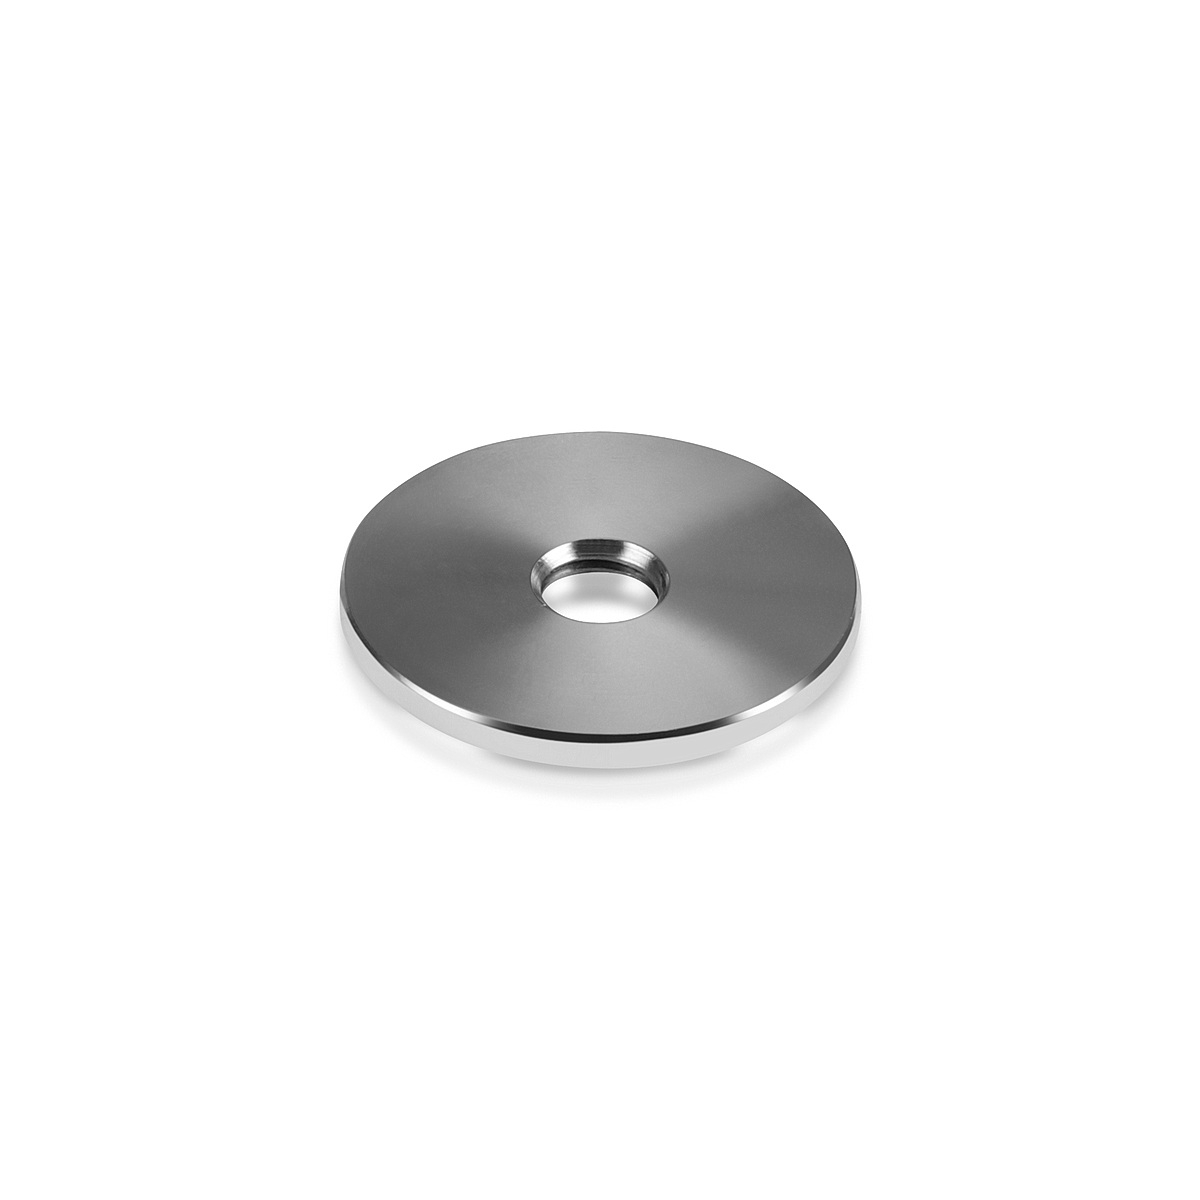 3/8-16 Threaded Barrels Diameter: 1 1/2'', Length: 1/8'',  Stainless Steel 316, Brushed Satin Finish [Required Material Hole Size: 3/8'' ]